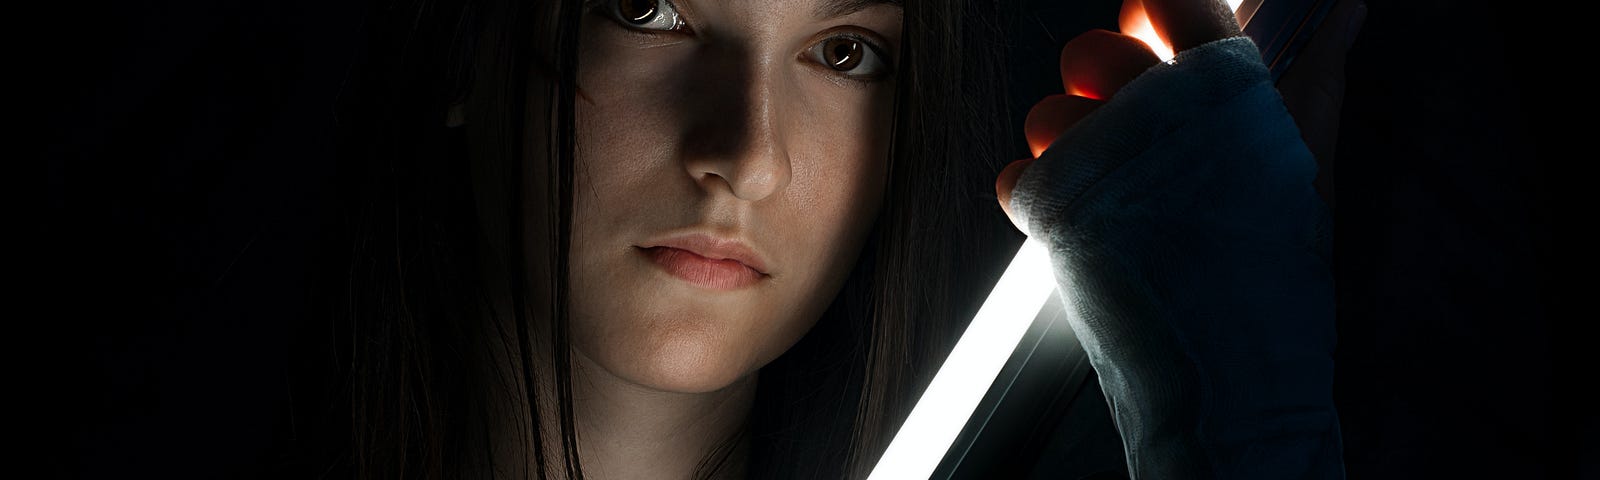 Photo of a woman's face staring down the camera, as she's gripping a sort of light sabre.